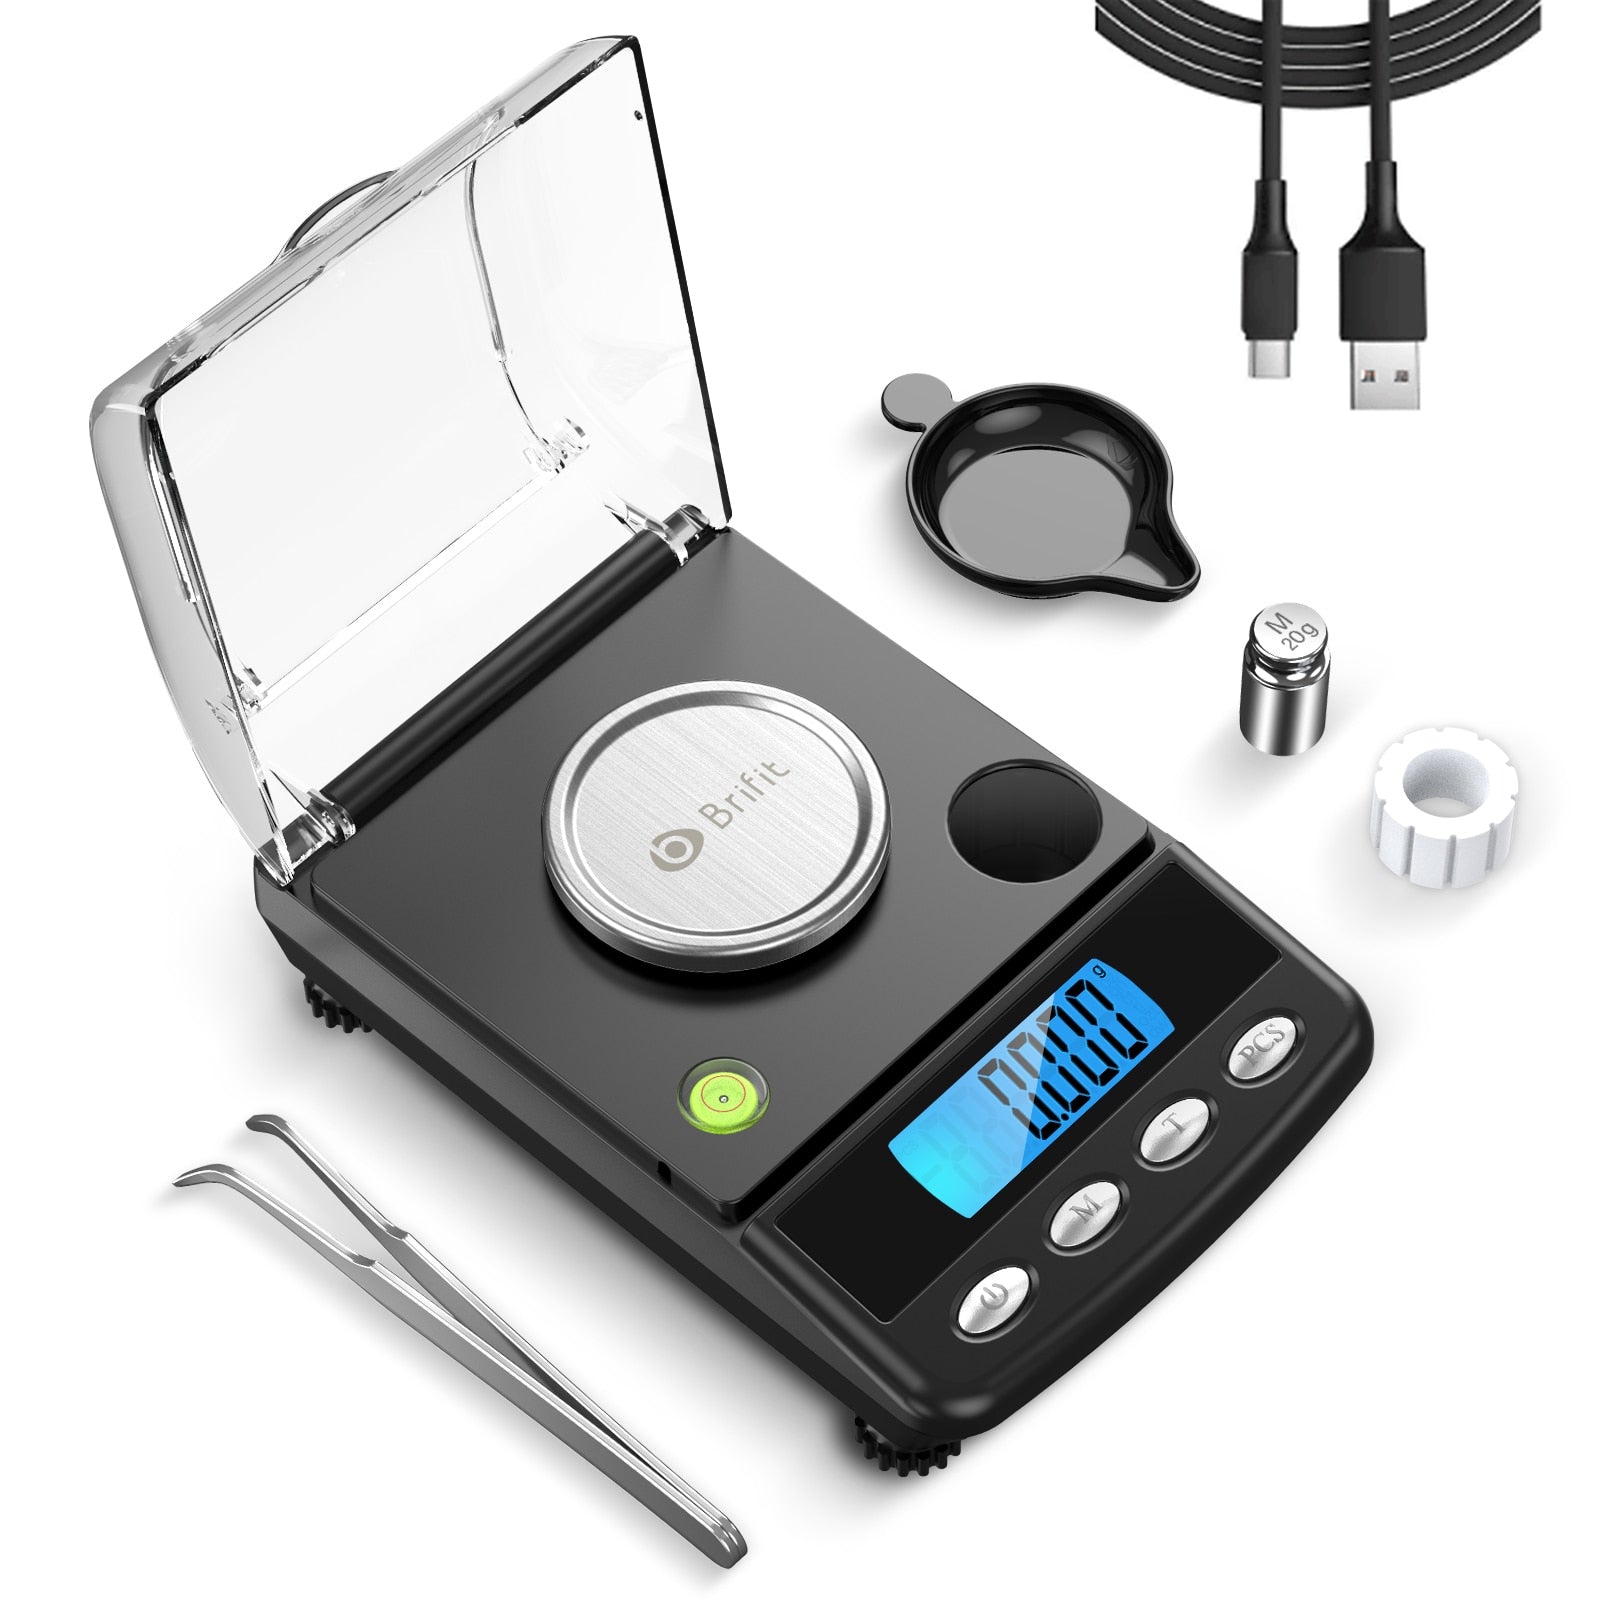 0.001g Precision Electronic Scales 100g/50g/20g Digital Weighing